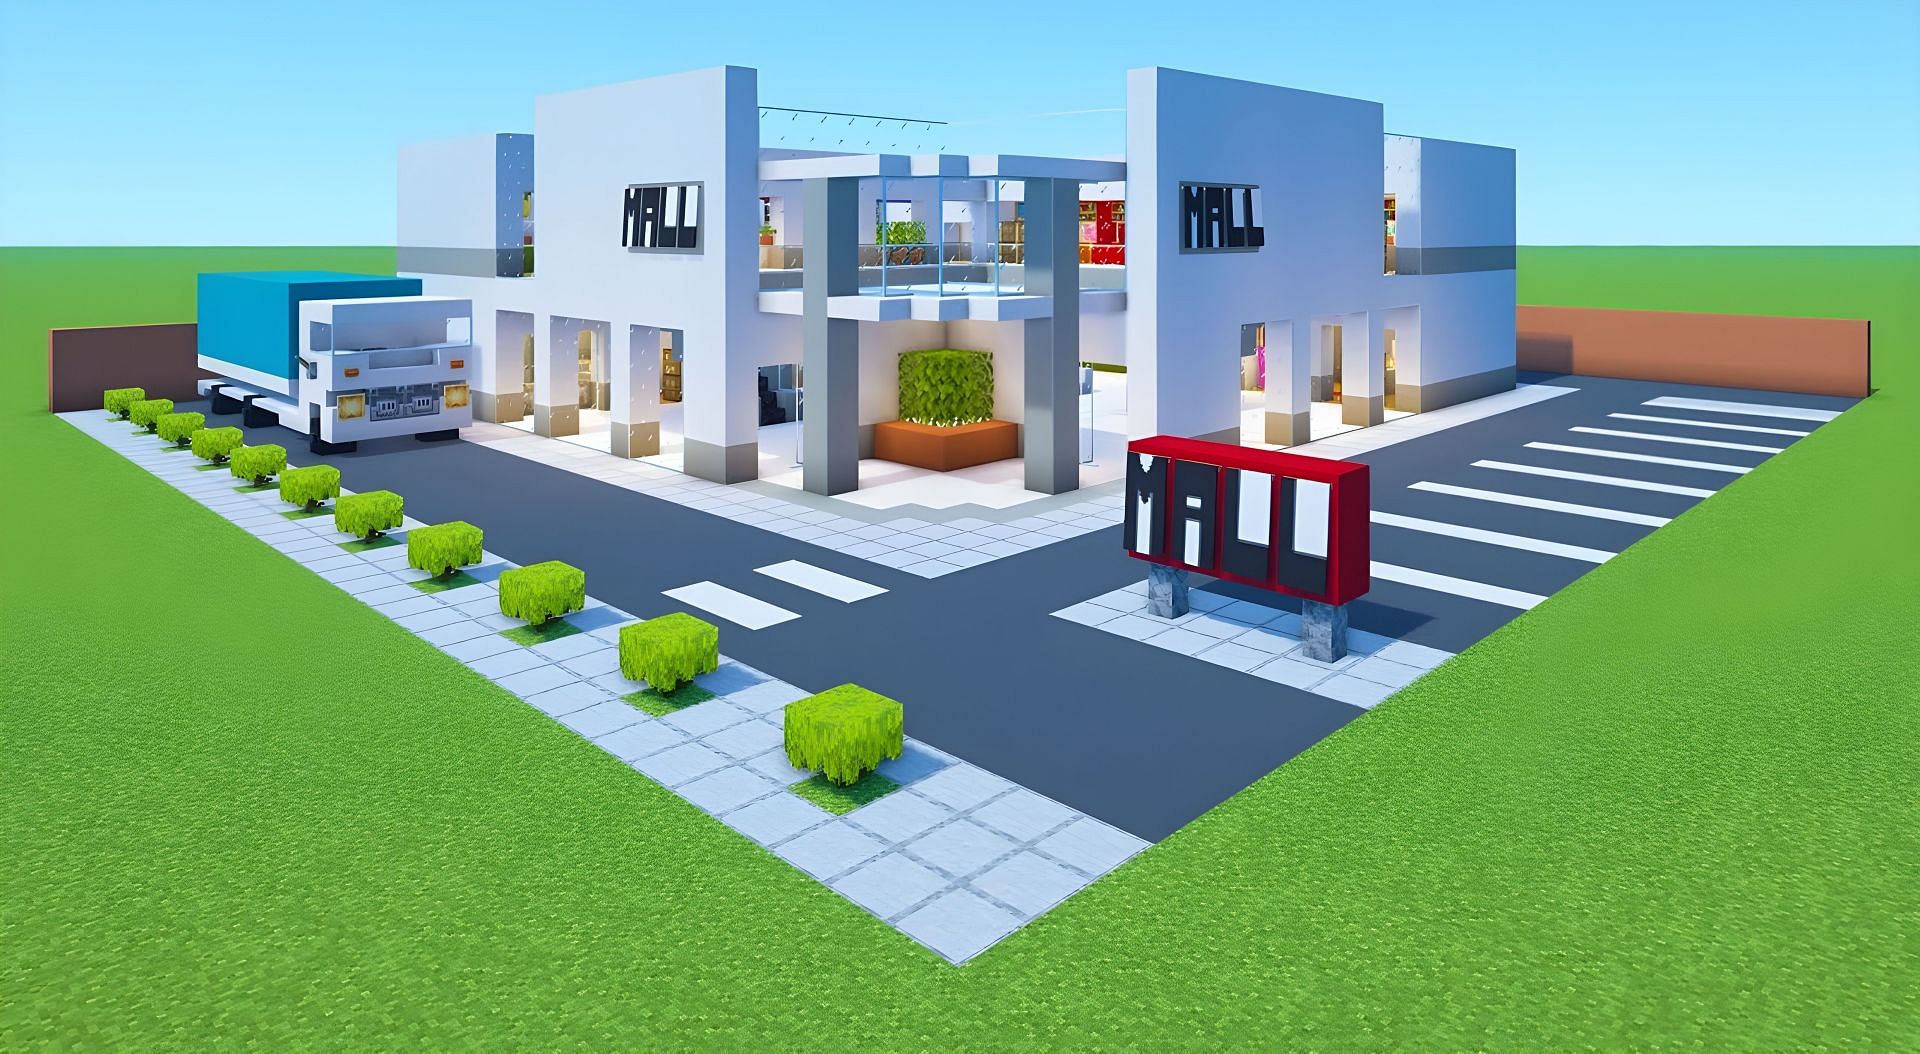 Malls can make for wonderful builds in Minecraft (Image via Youtube/TSMC - Minecraft)